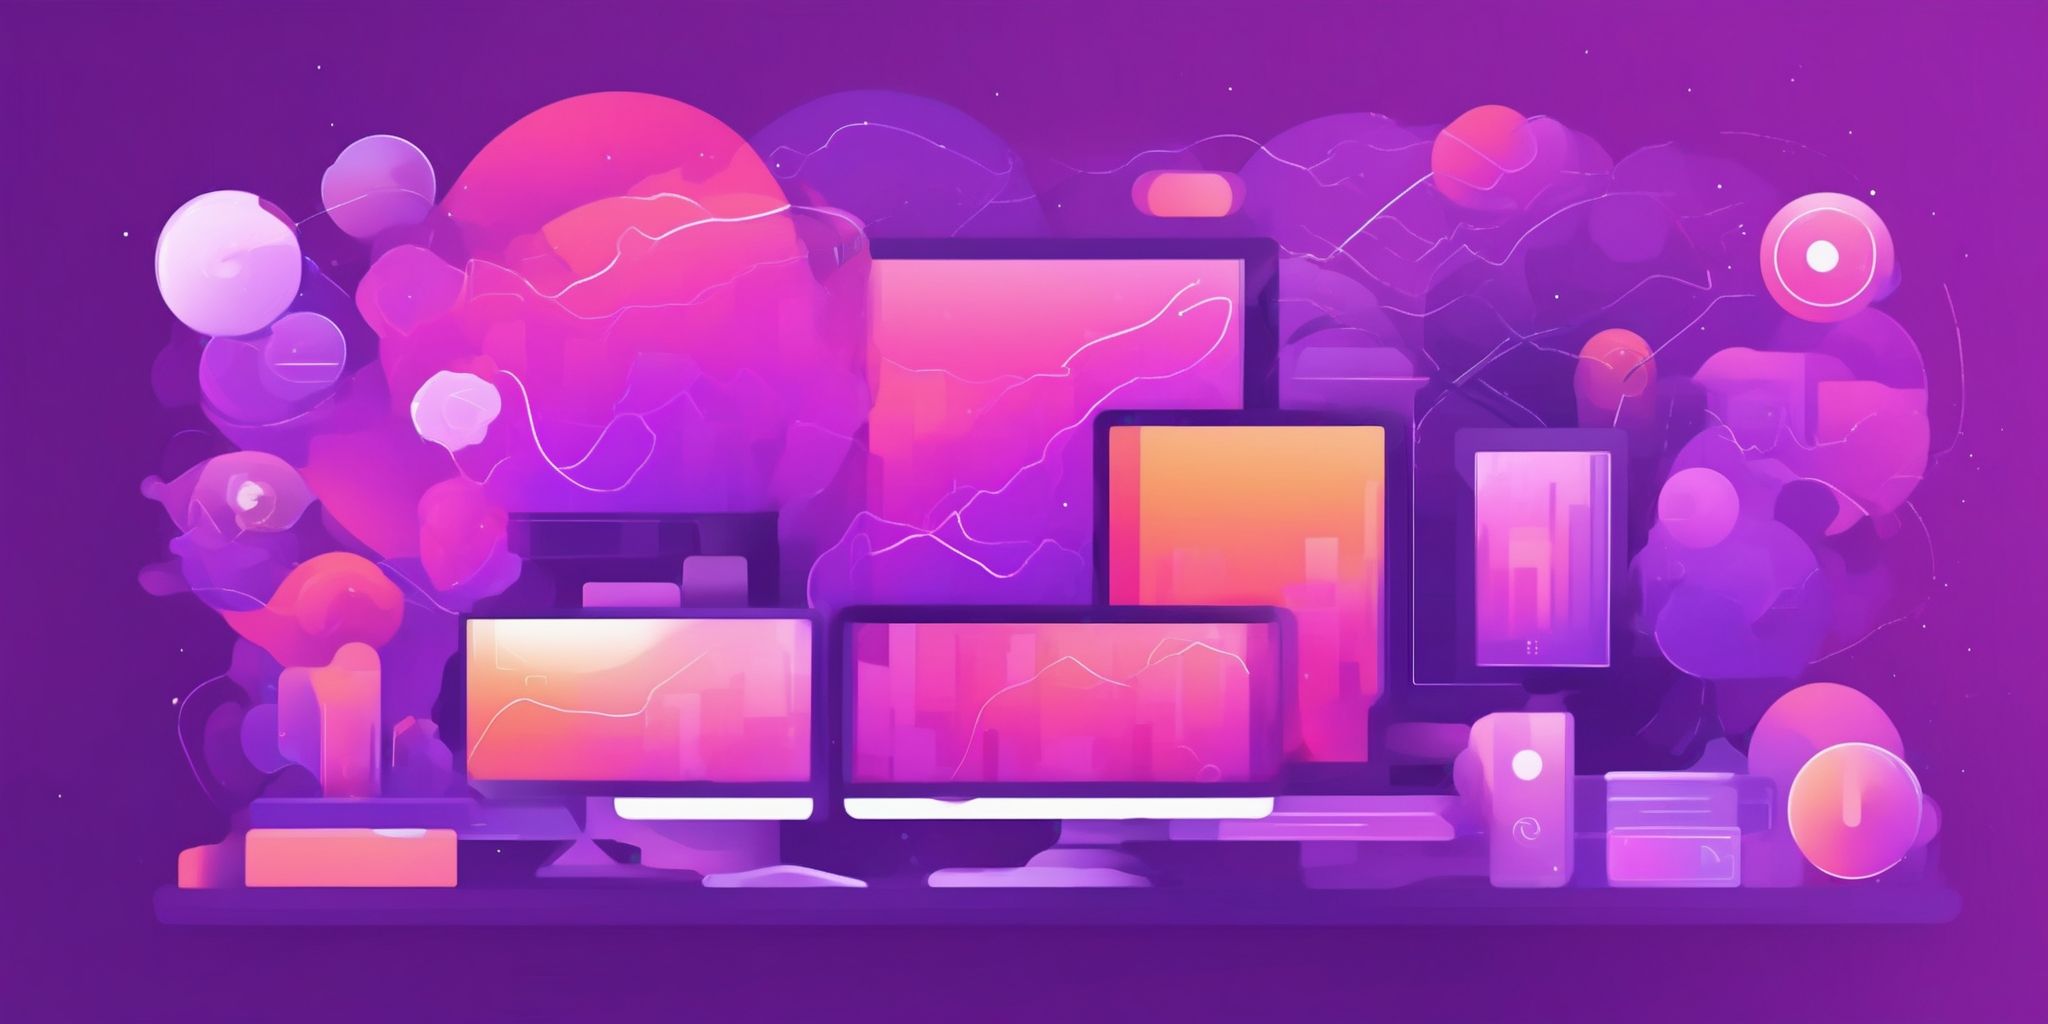 Software in flat illustration style, colorful purple gradient colors